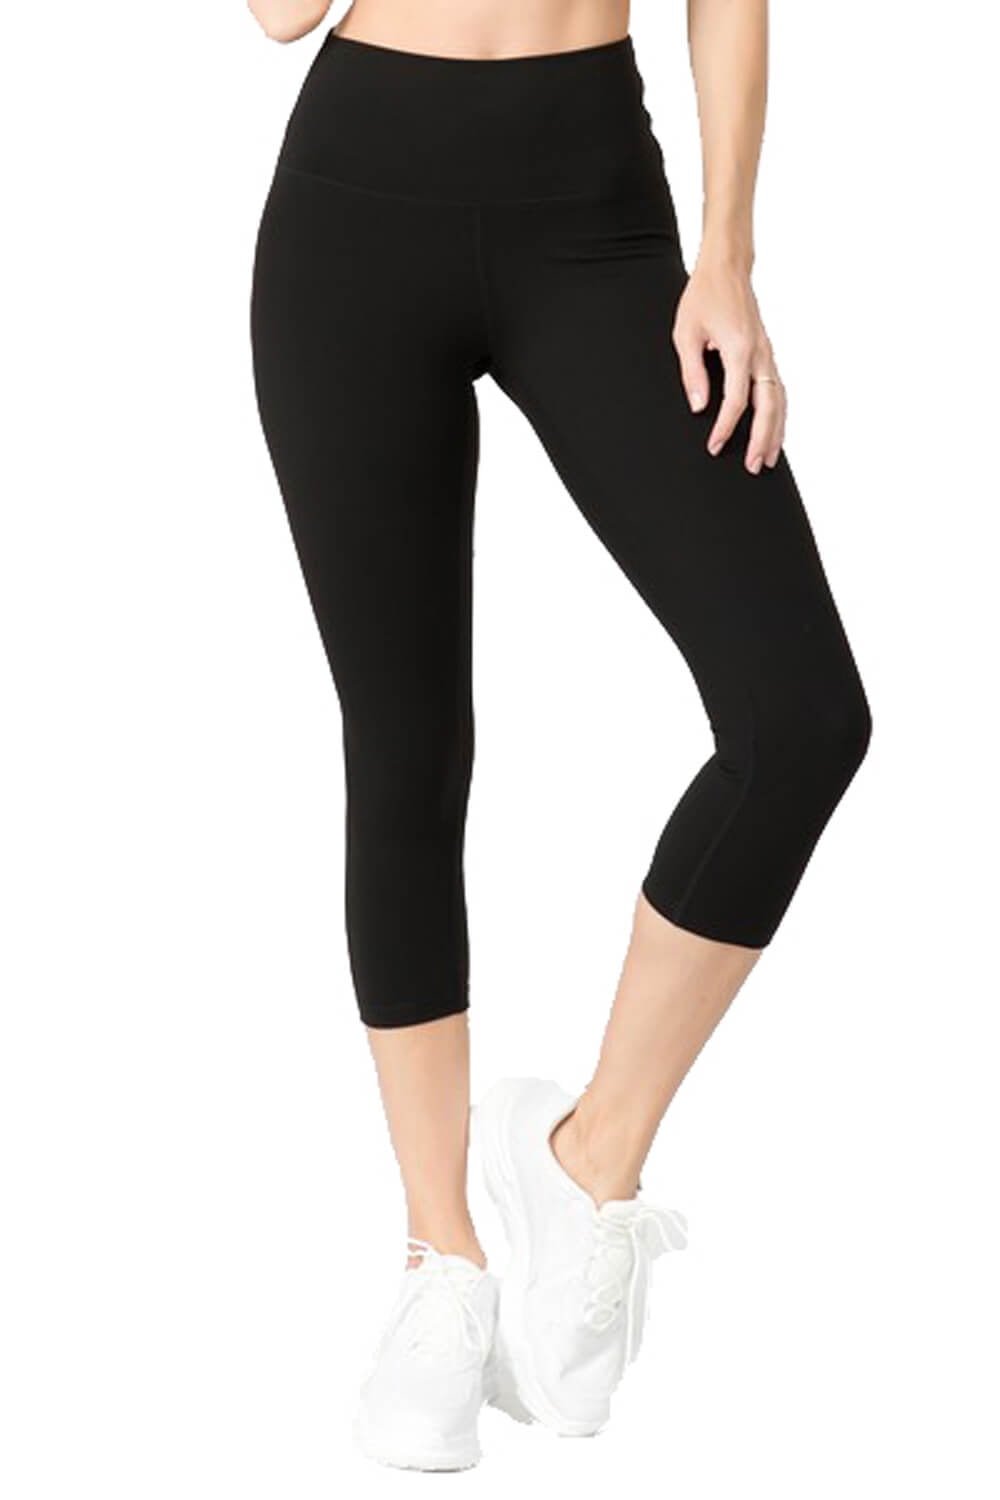 Women's Solid Yoga Active Gym Capri Leggings Buttery Soft Spandex Stretchy 